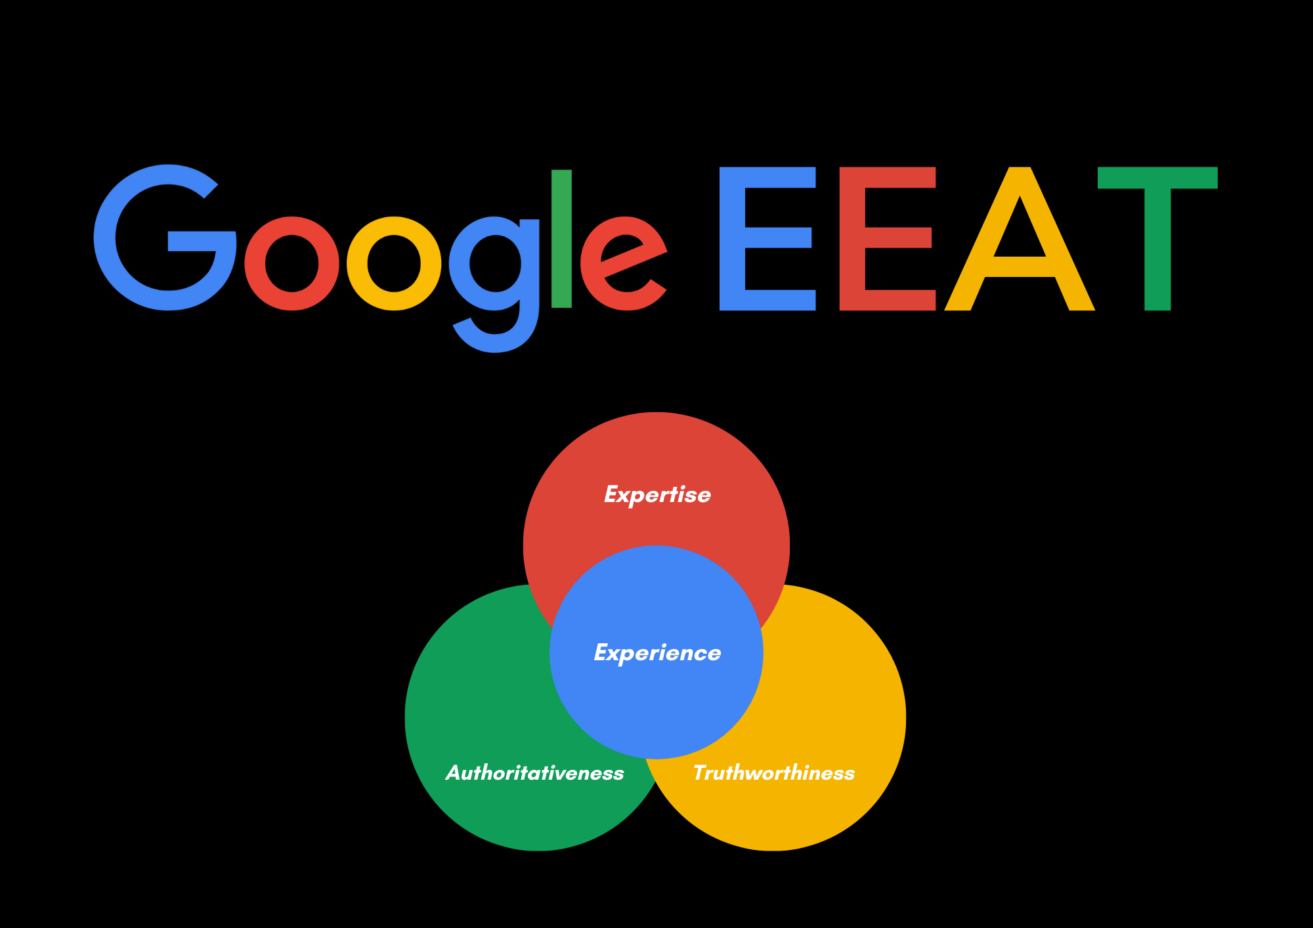 Google EEAT: What Does The Update Mean For Websites? | Red Cow Media